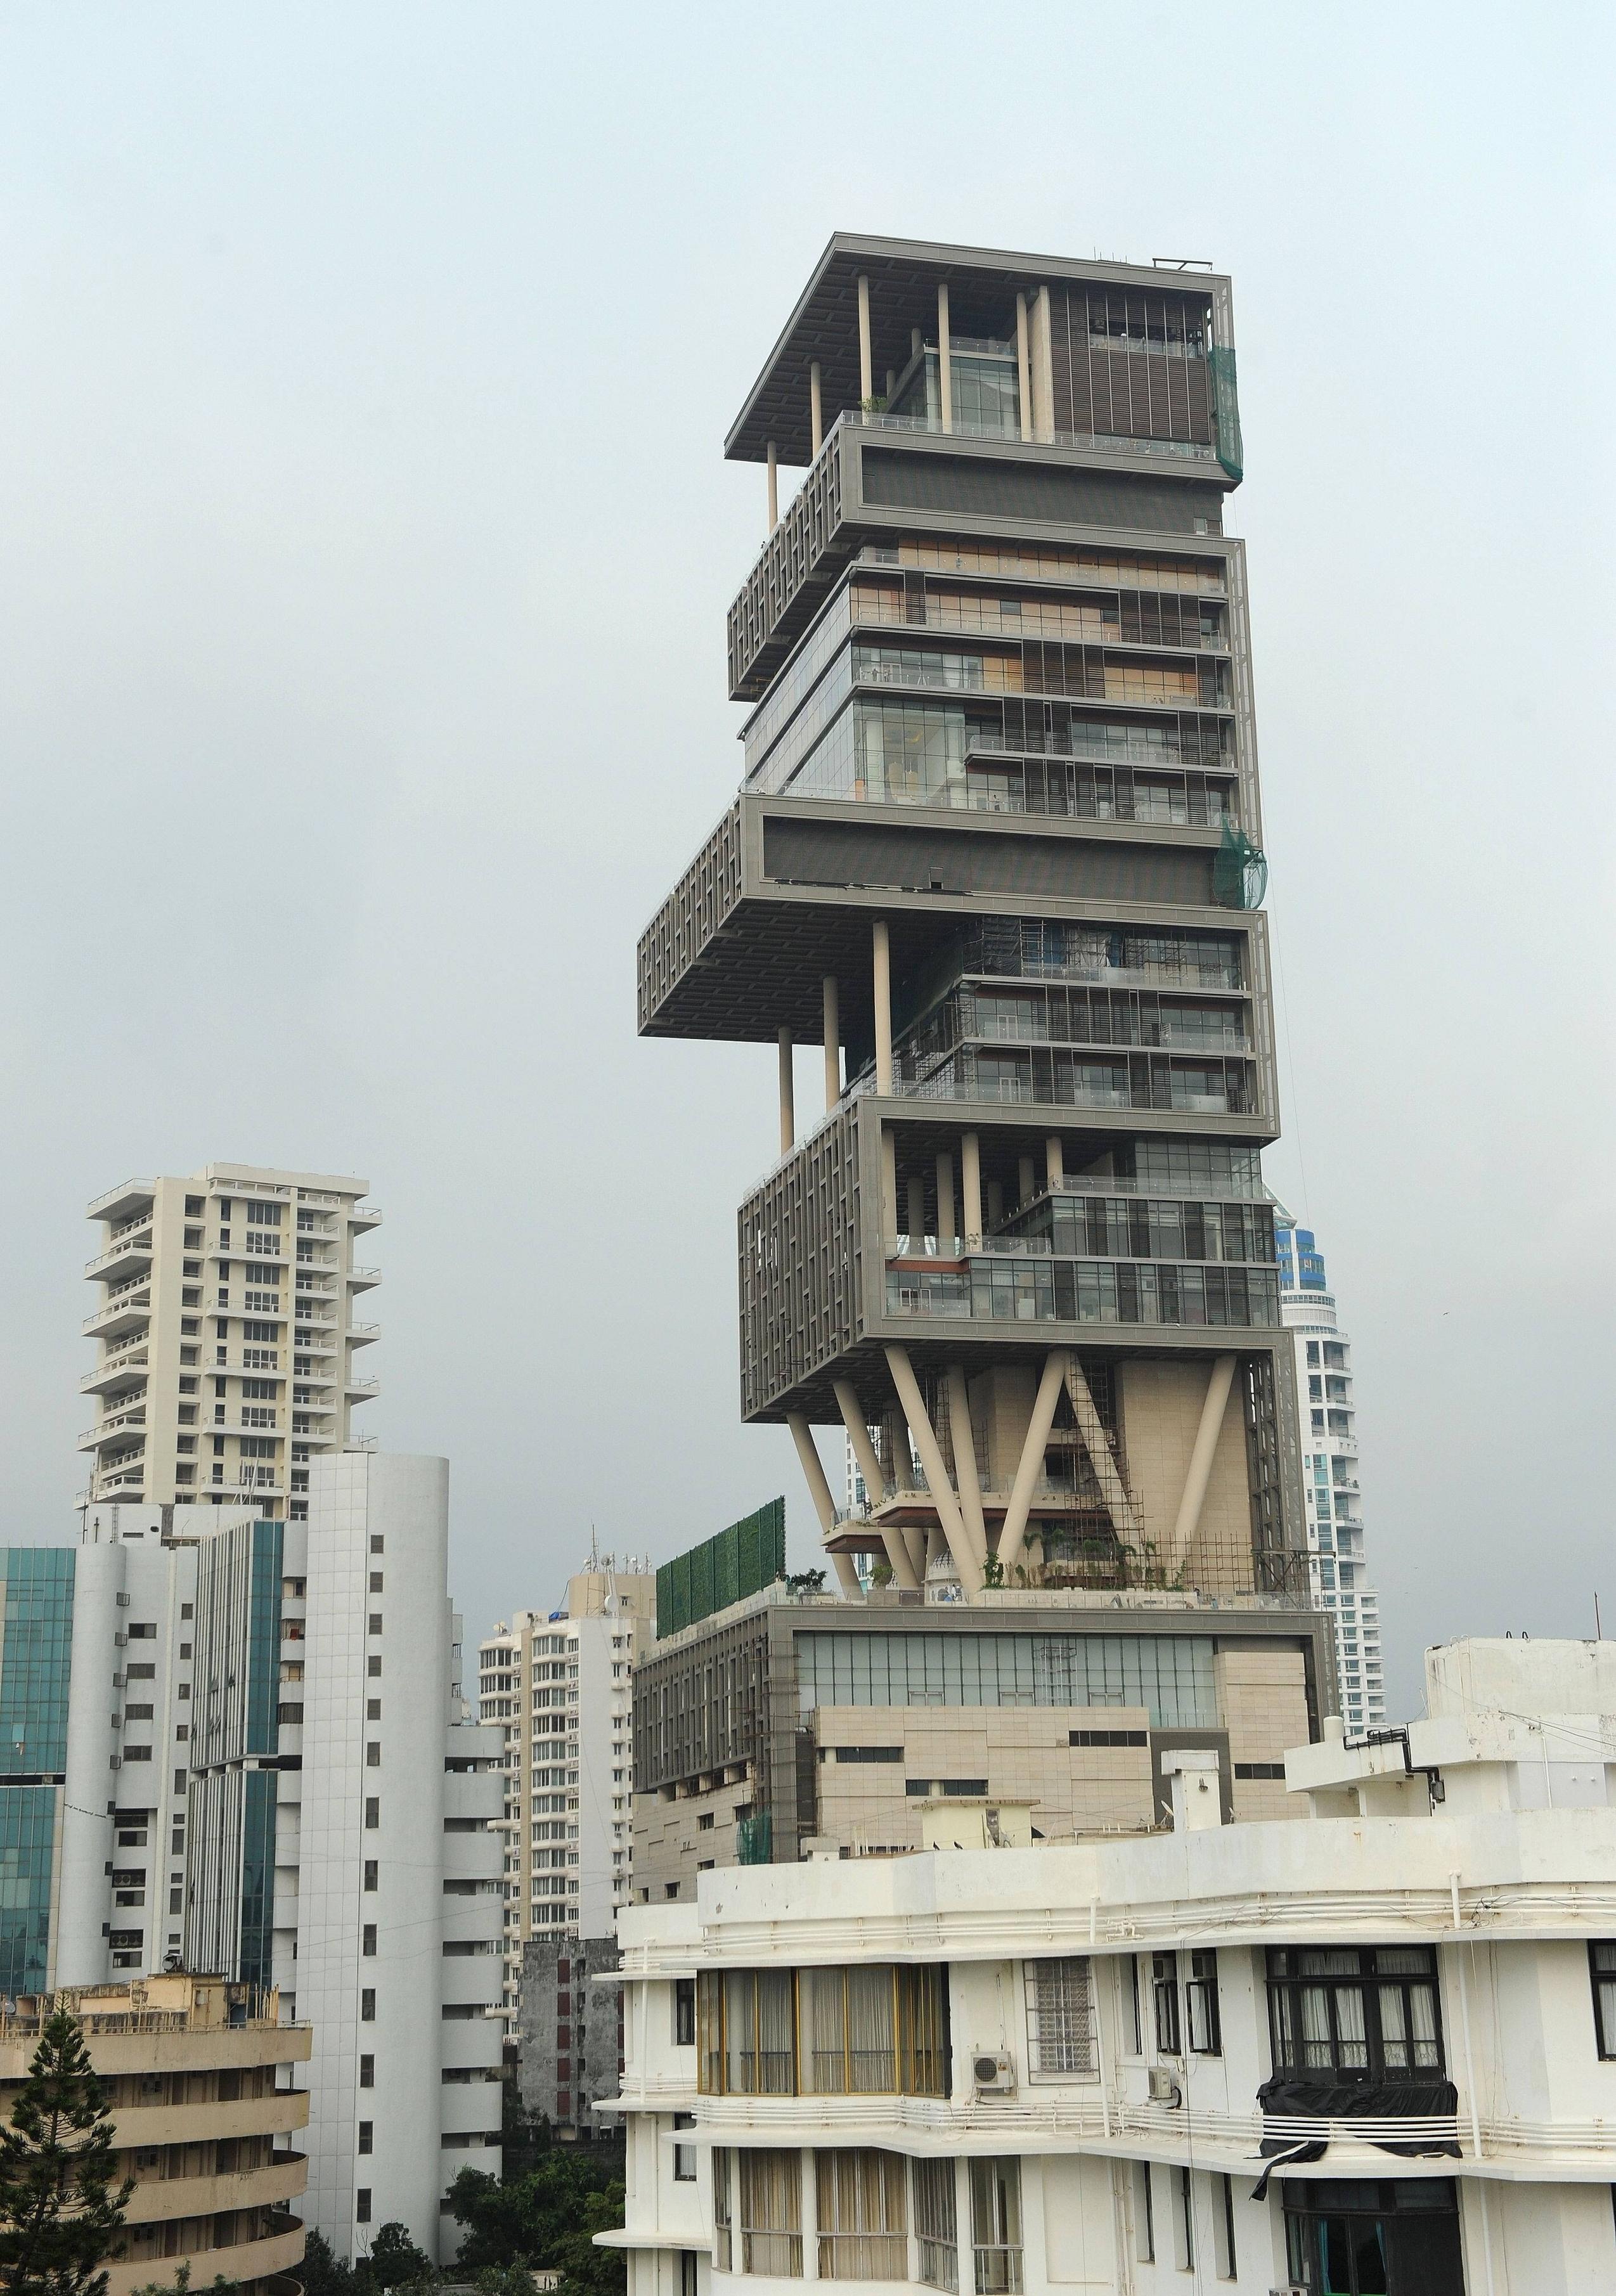 Antilia in Mumbai, India is the most expensive private residence in the world, worth over $1,000,000,000! The 27-storey, 400,000 square feet tower is eight miles away from one of the most densely populated slums where an estimated 1.3 million people live for every one square mile